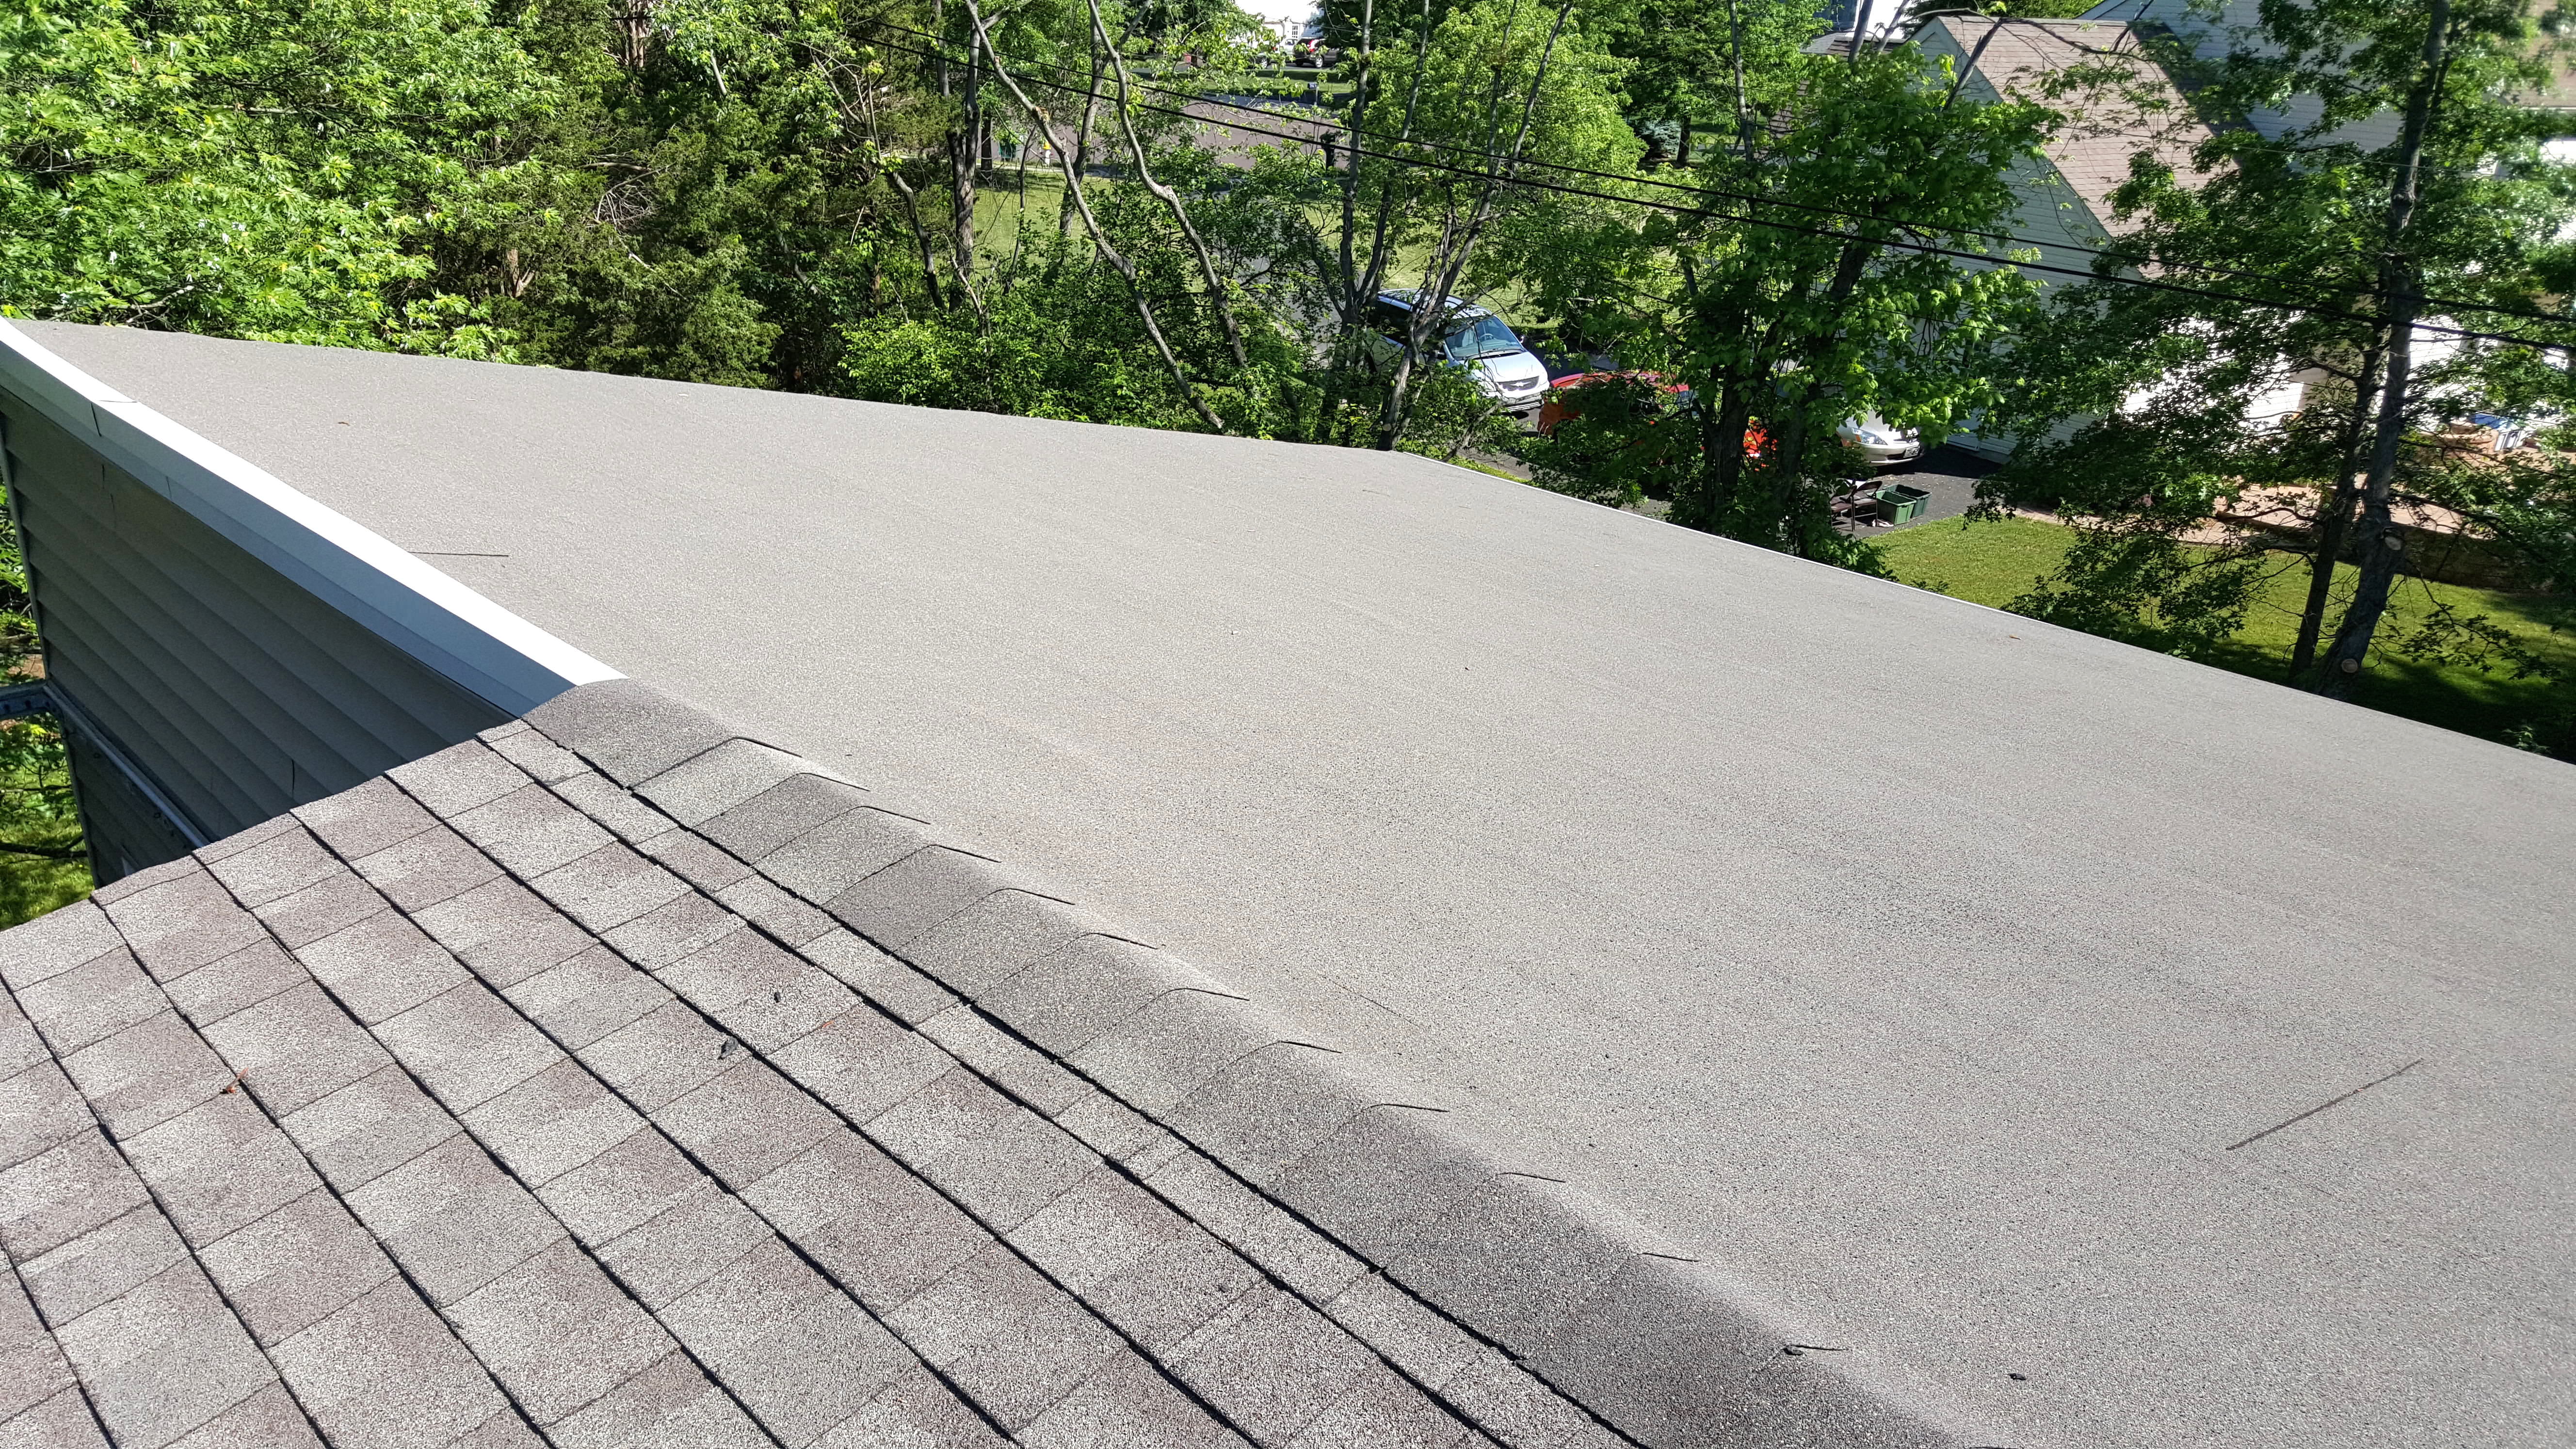 Common Roofing Materials and When to Repair or Replace Them